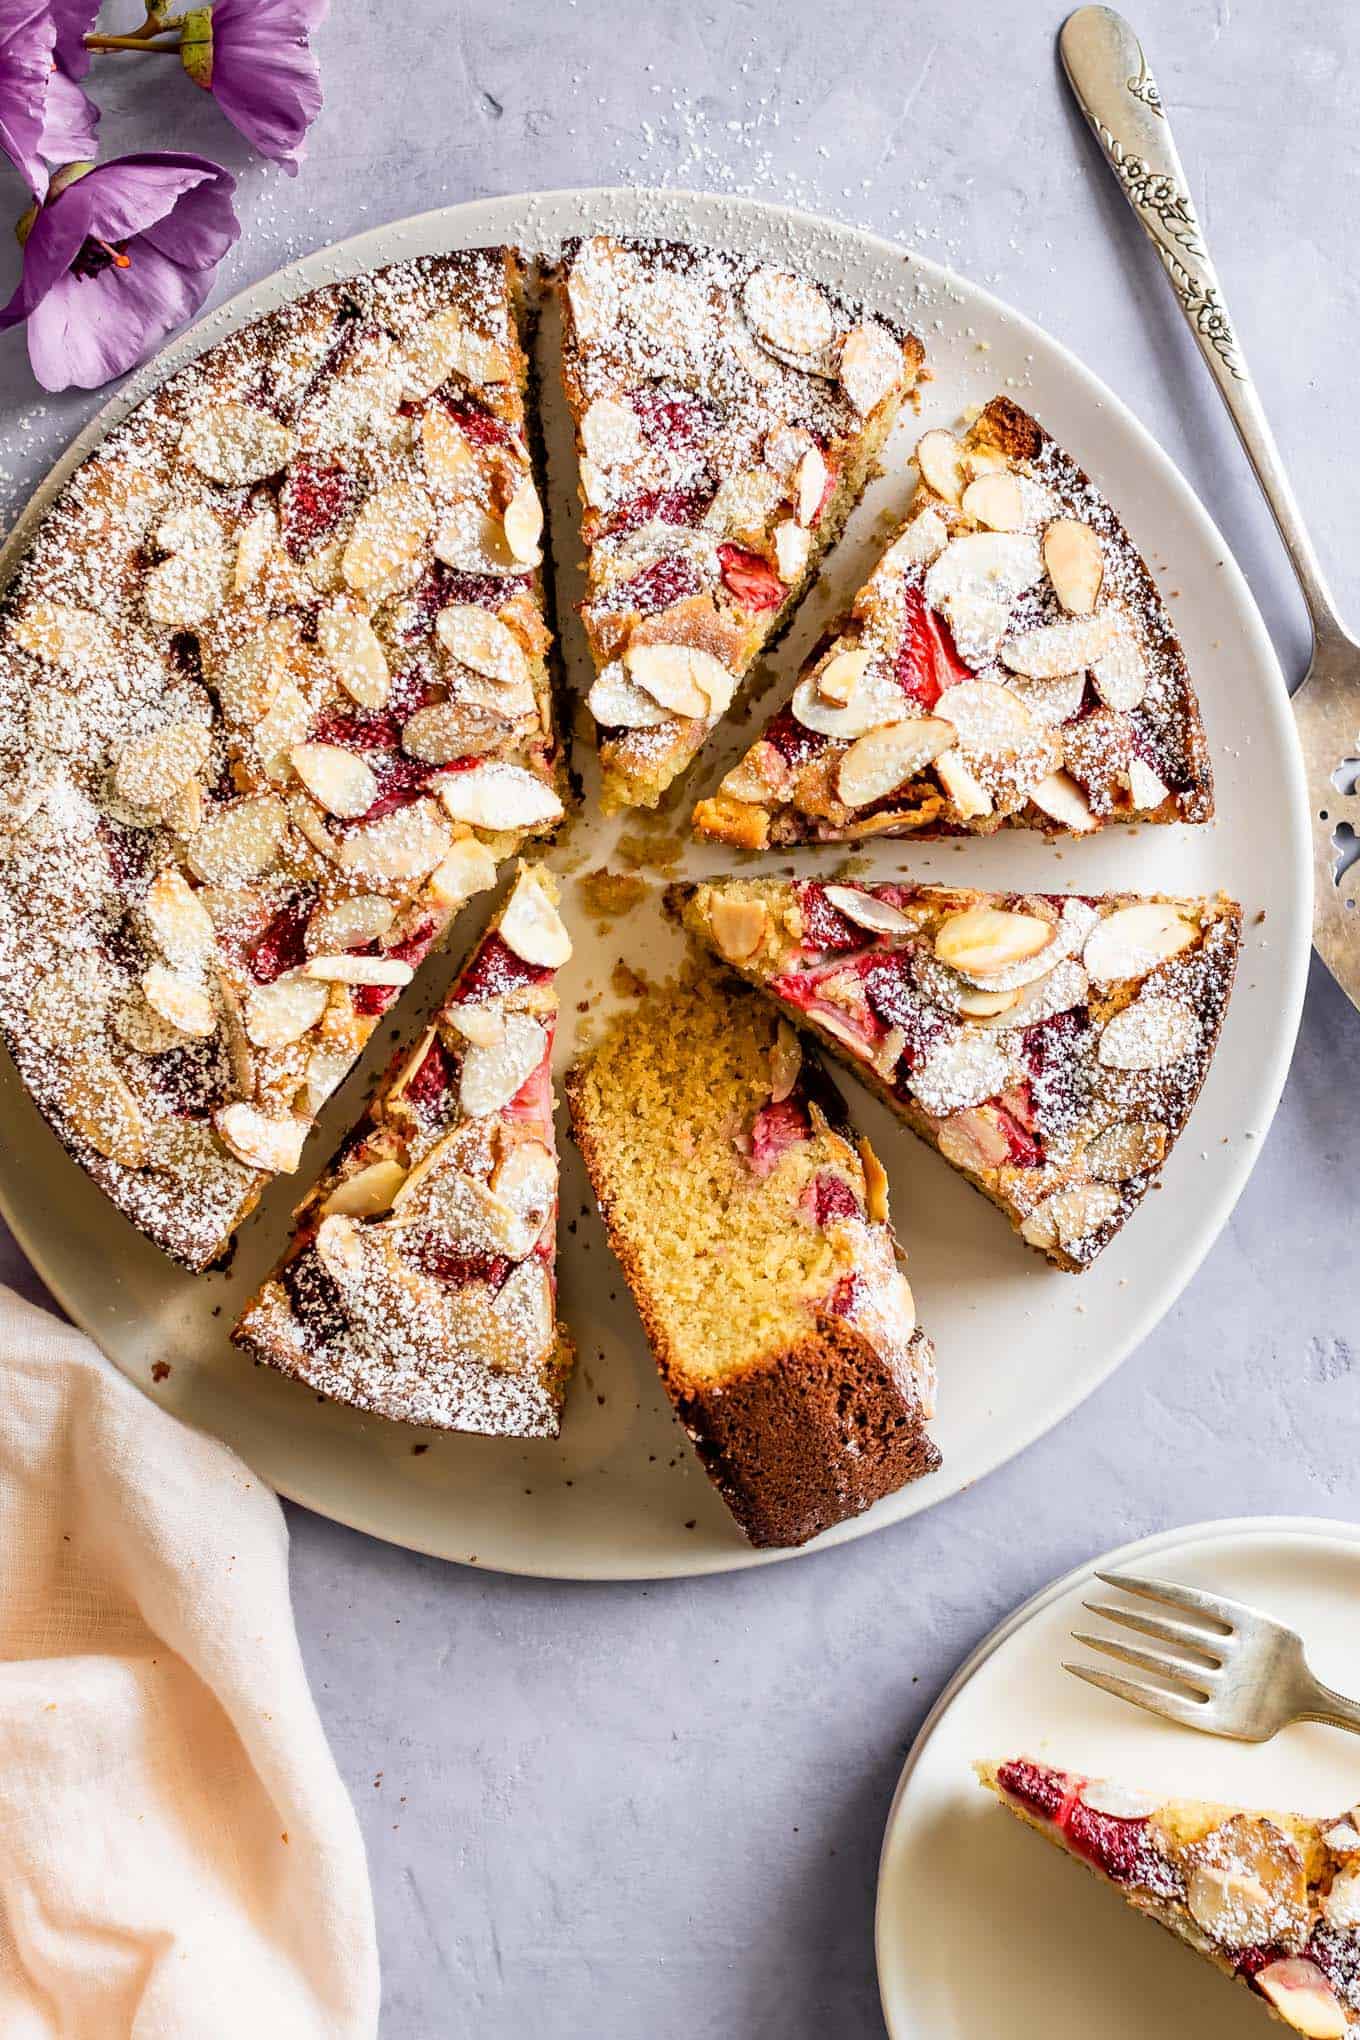 Sliced Almond Cake with Strawberries